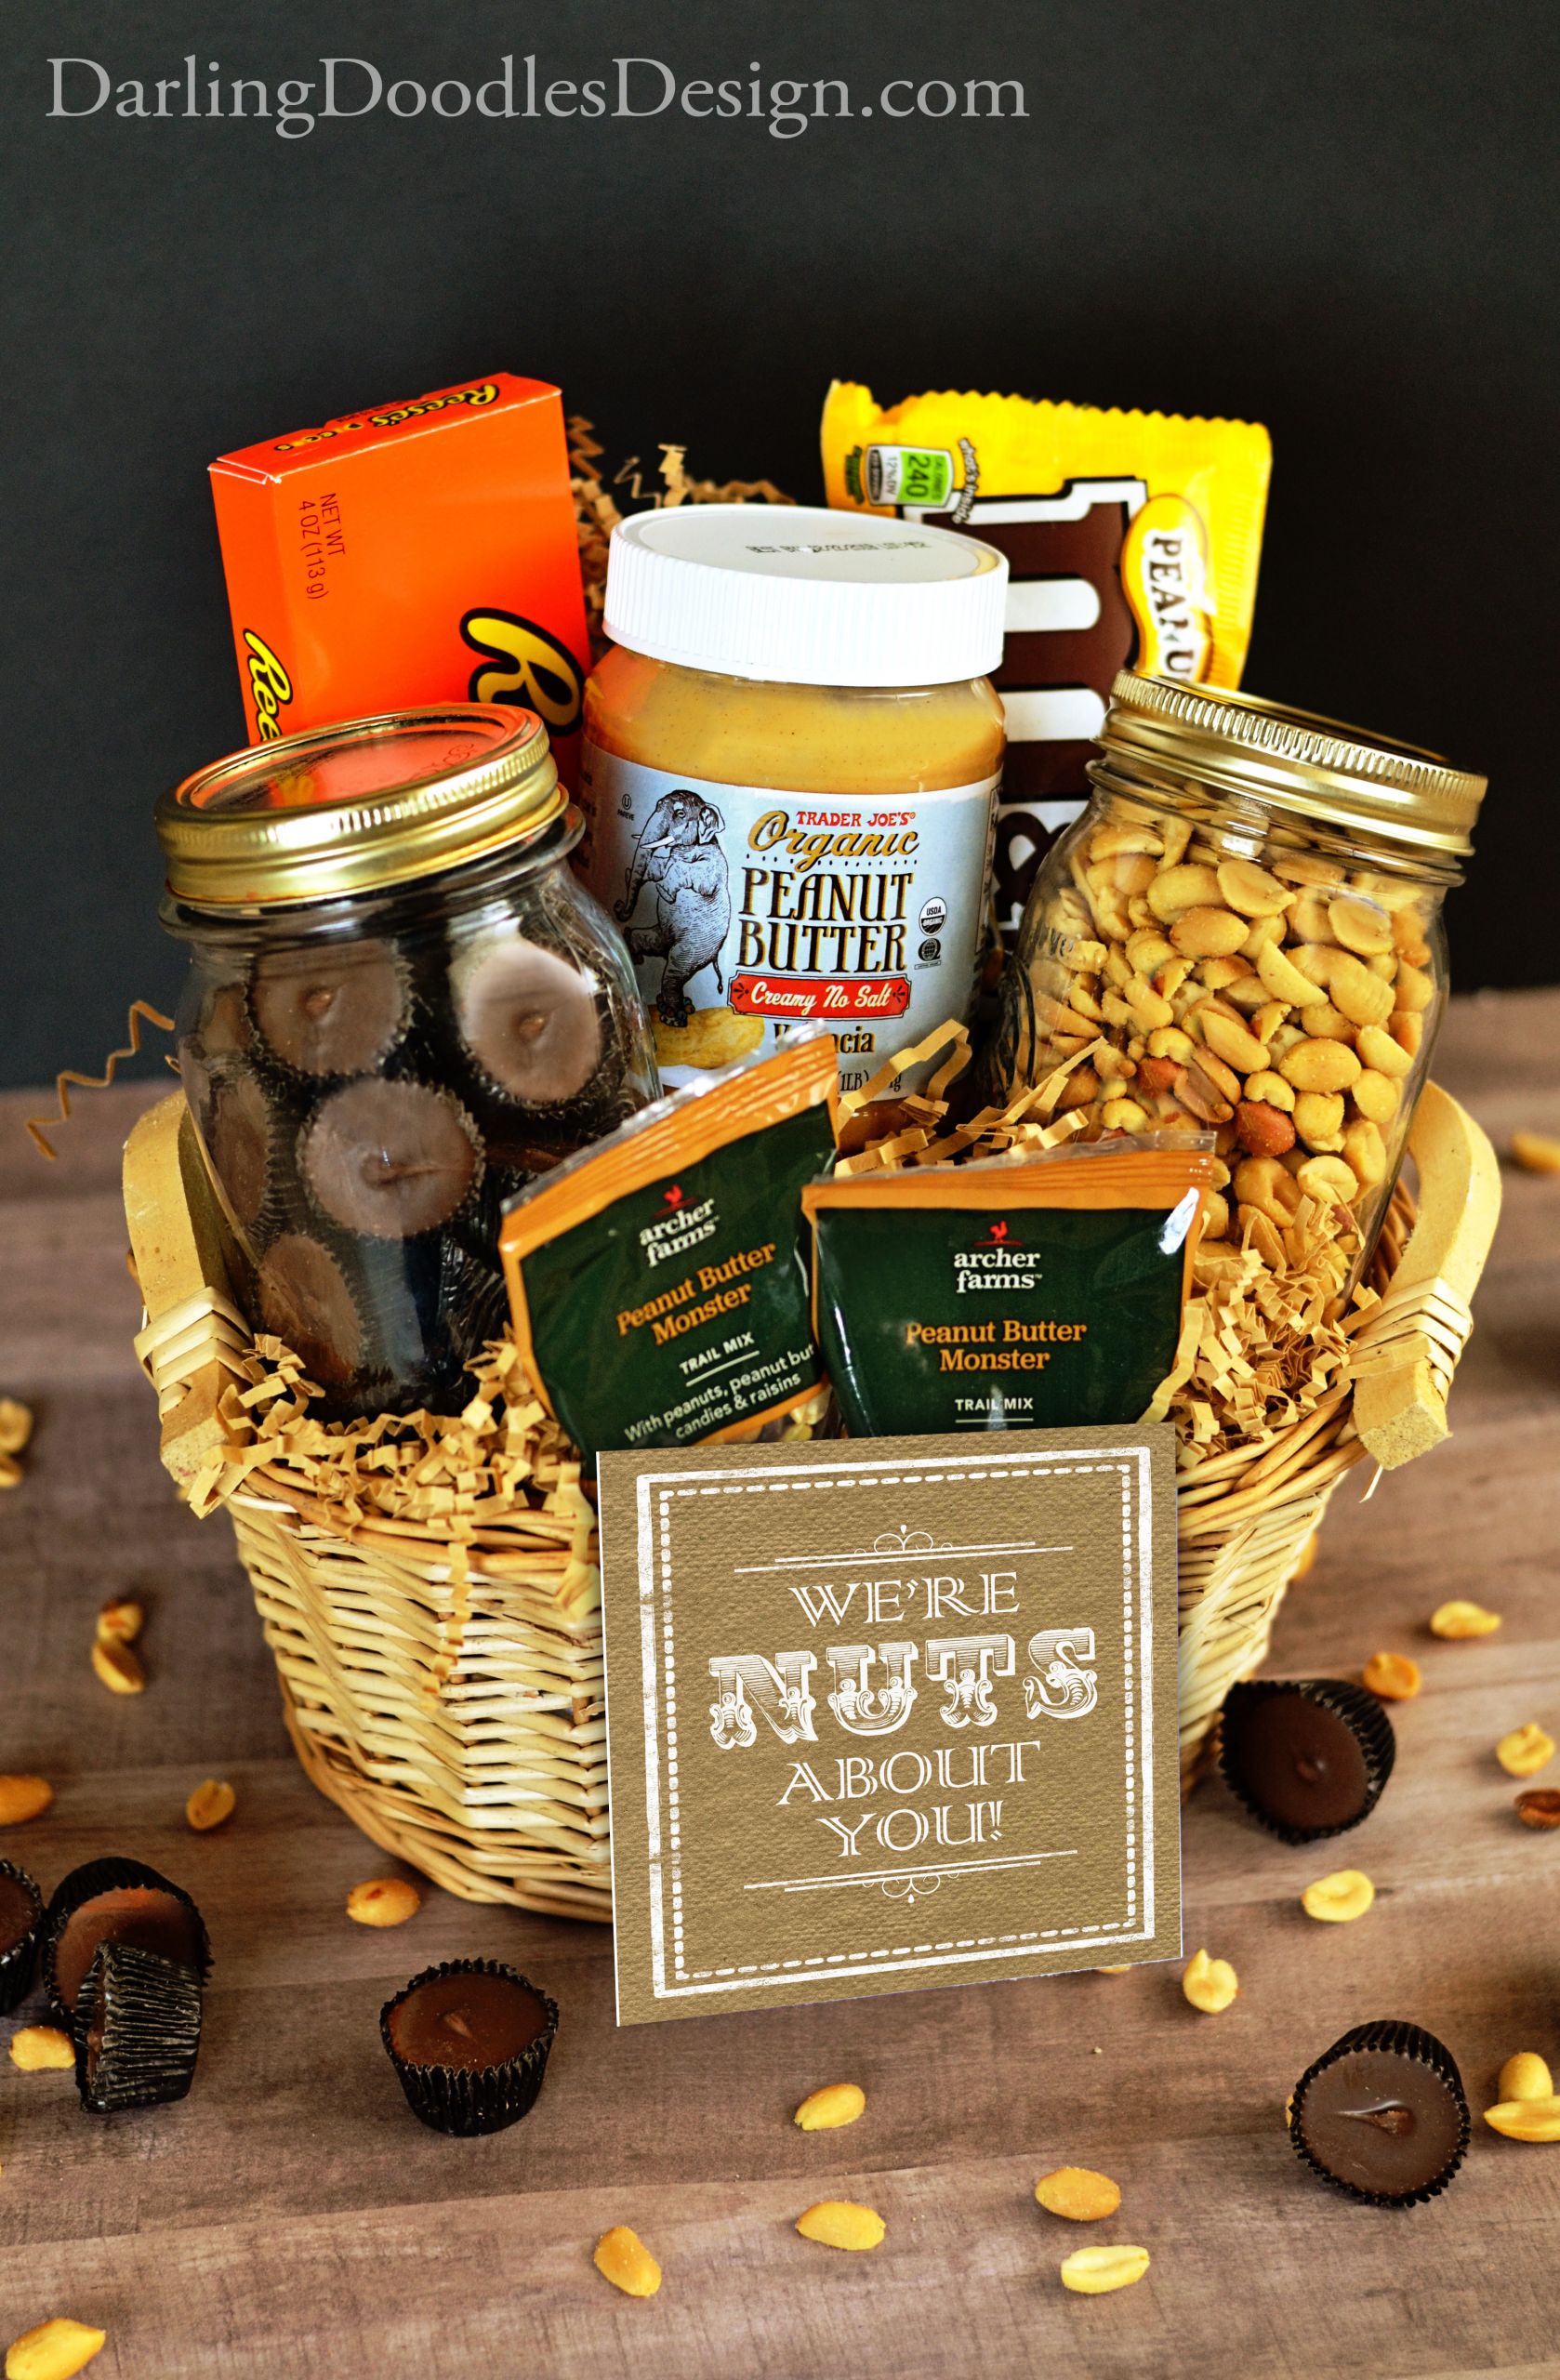 Father'S Day Gift Delivery Ideas
 Nuts About You Father s Day Gift Basket Darling Doodles